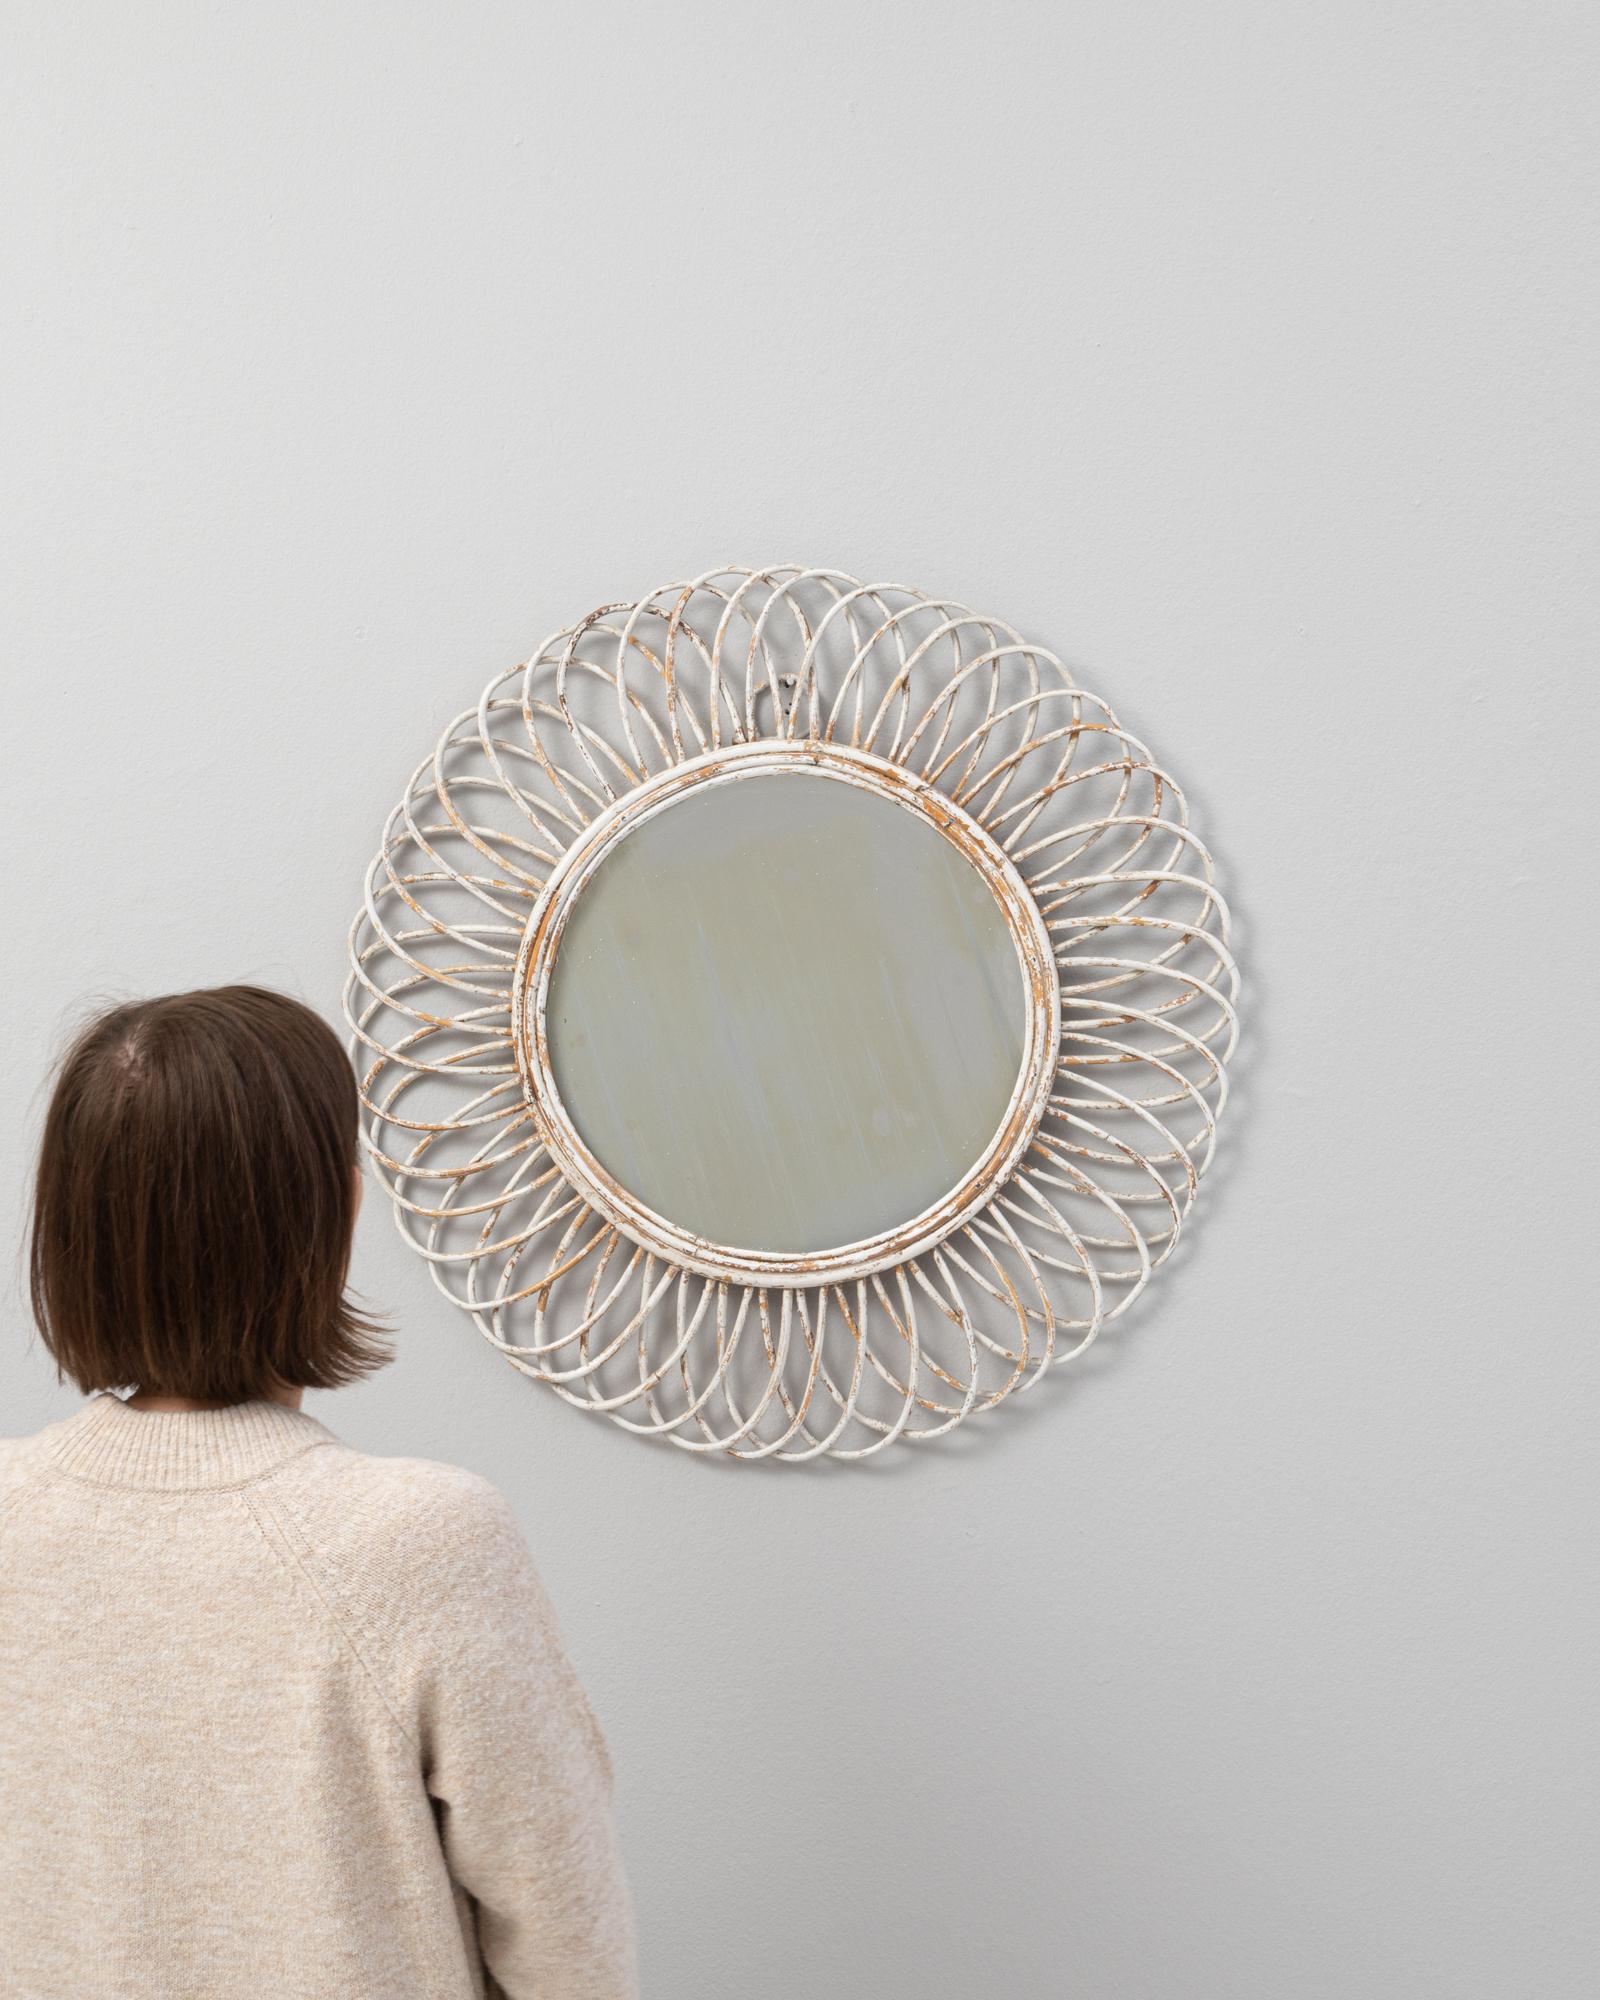 Adorn your abode with the serene sophistication of this 20th Century French Wood White Patinated Mirror, a stunning fusion of vintage allure and chic design. Its radiant, sunburst-inspired wooden frame is gracefully whitewashed and brushed with a